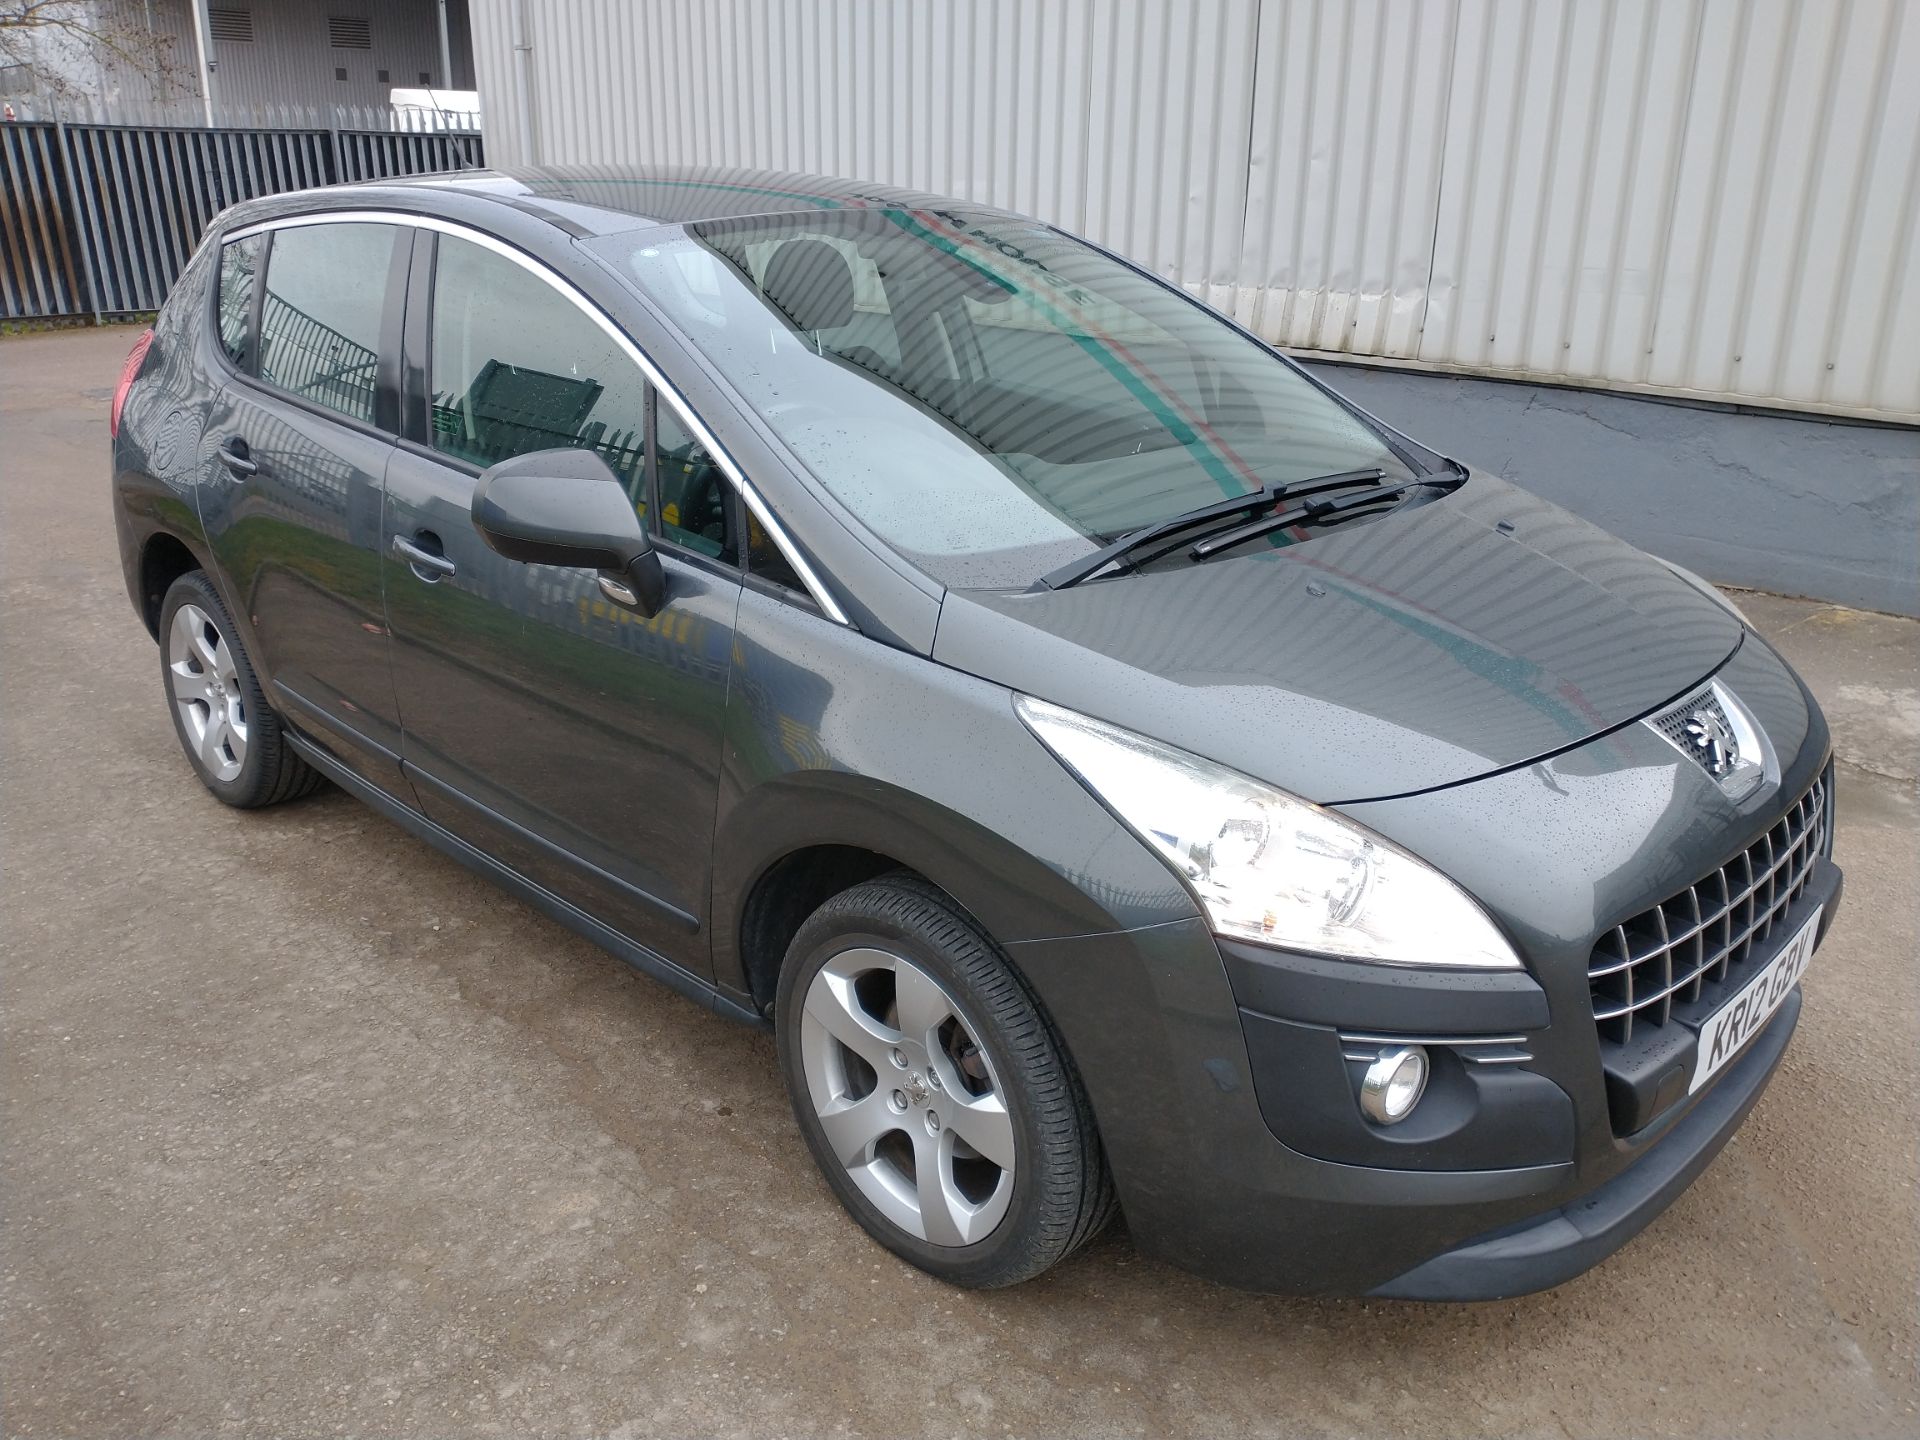 2012 Peugeot 3008 Active HDI 1.6 5DR SUV - CL505 - NO VAT ON THE HAMM - Image 7 of 19